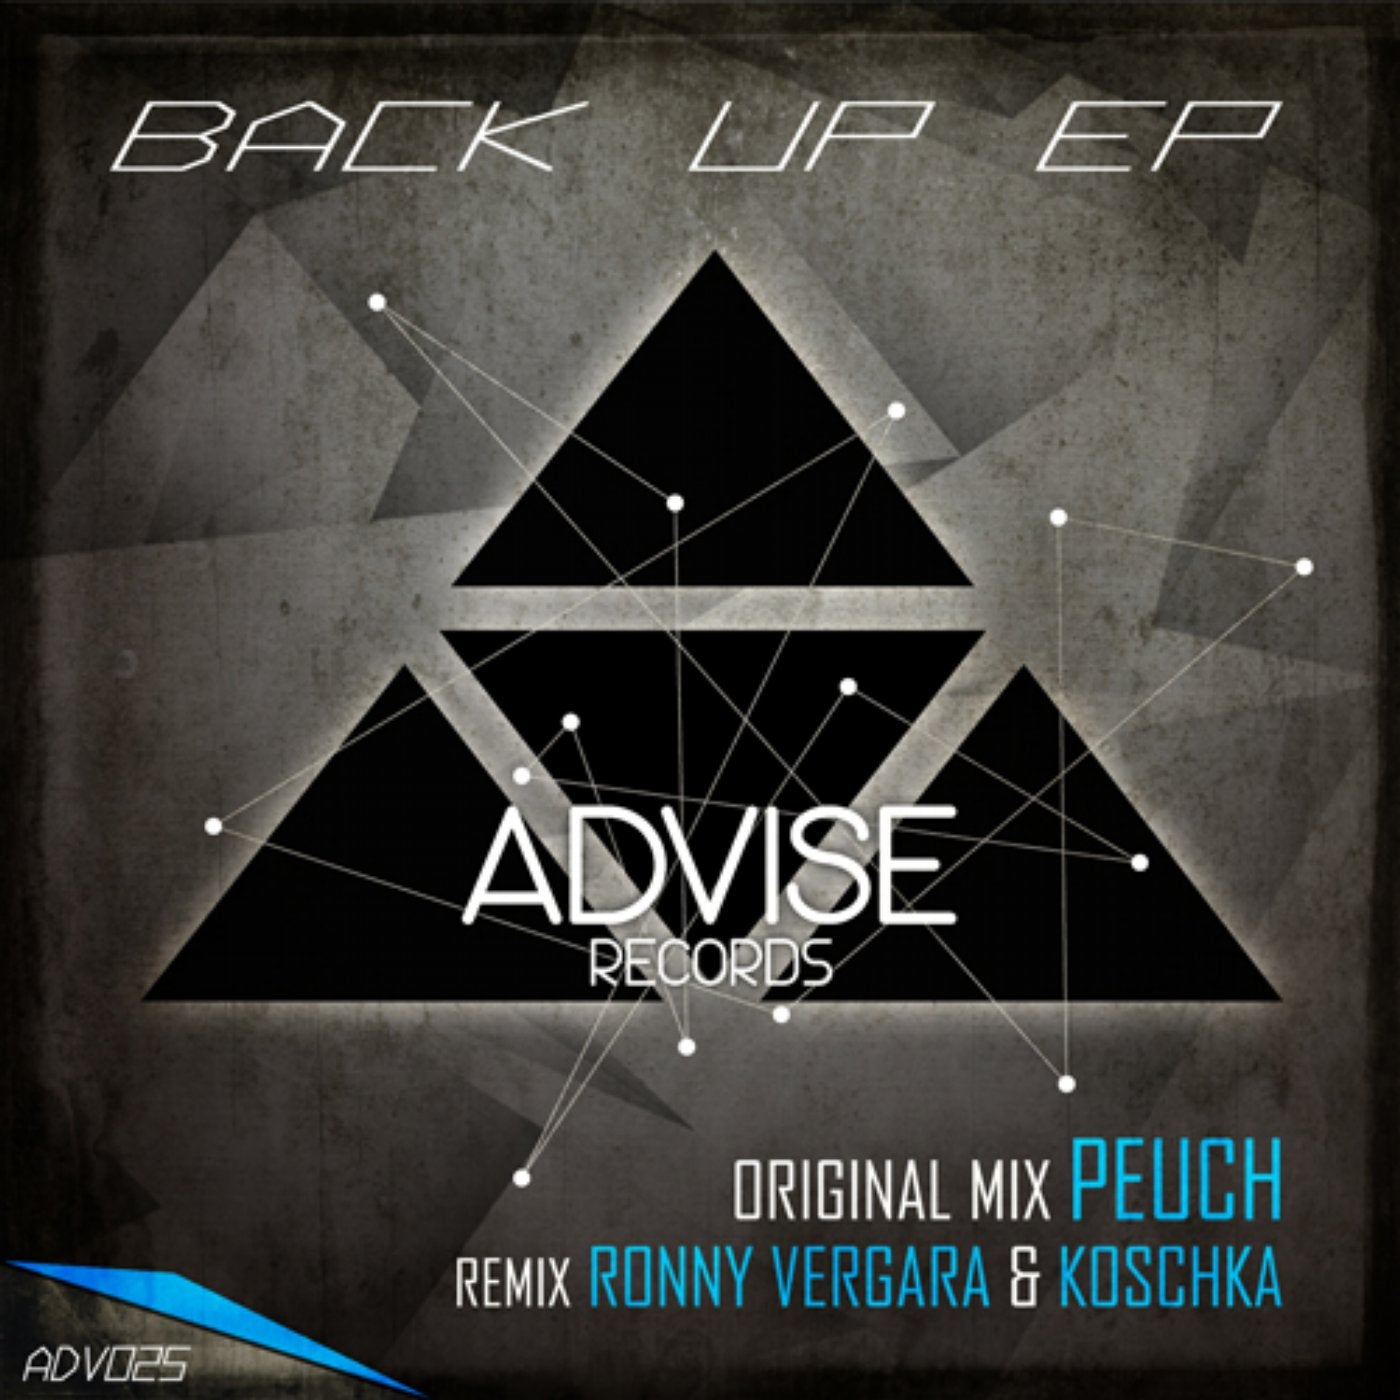 Back Up EP